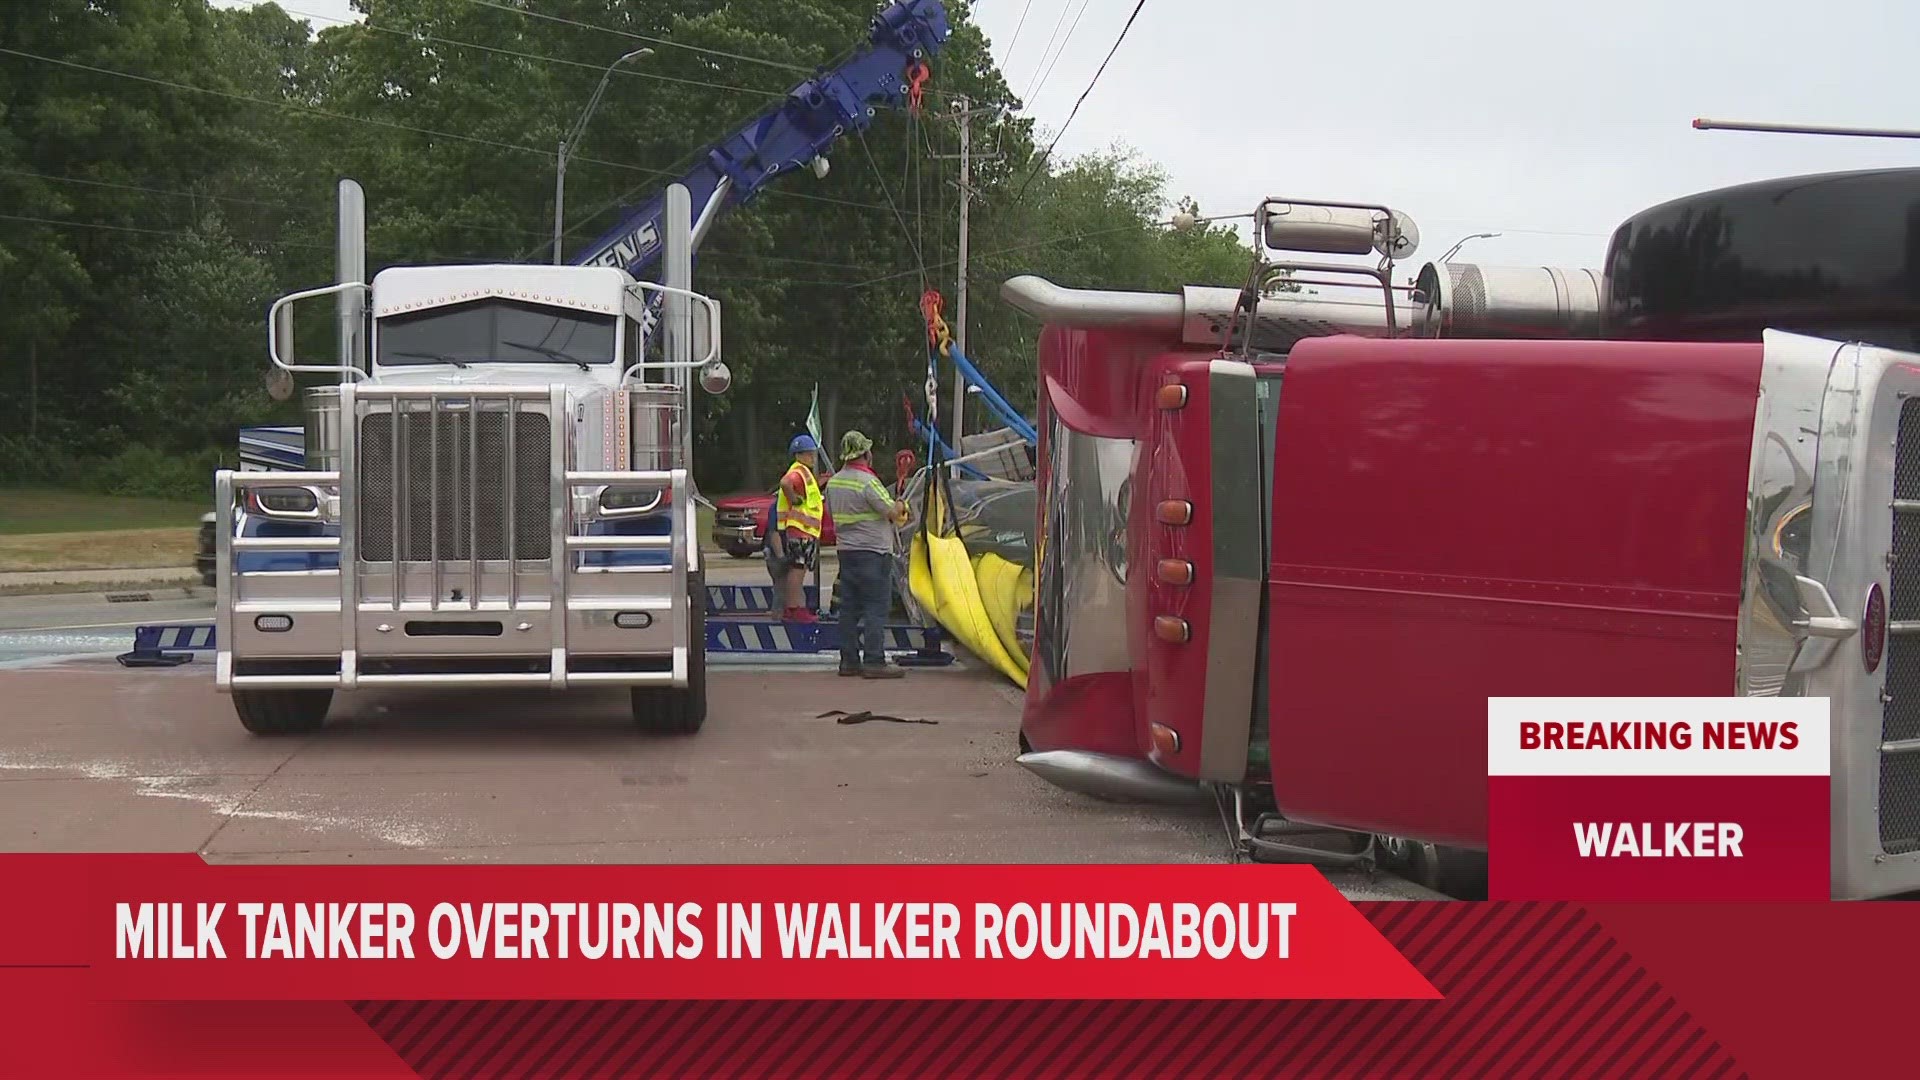 Walker Police are tending to a rollover crash at the roundabout at Remembrance and Wilson Avenue Thursday afternoon. Expect backups as crews clean up.